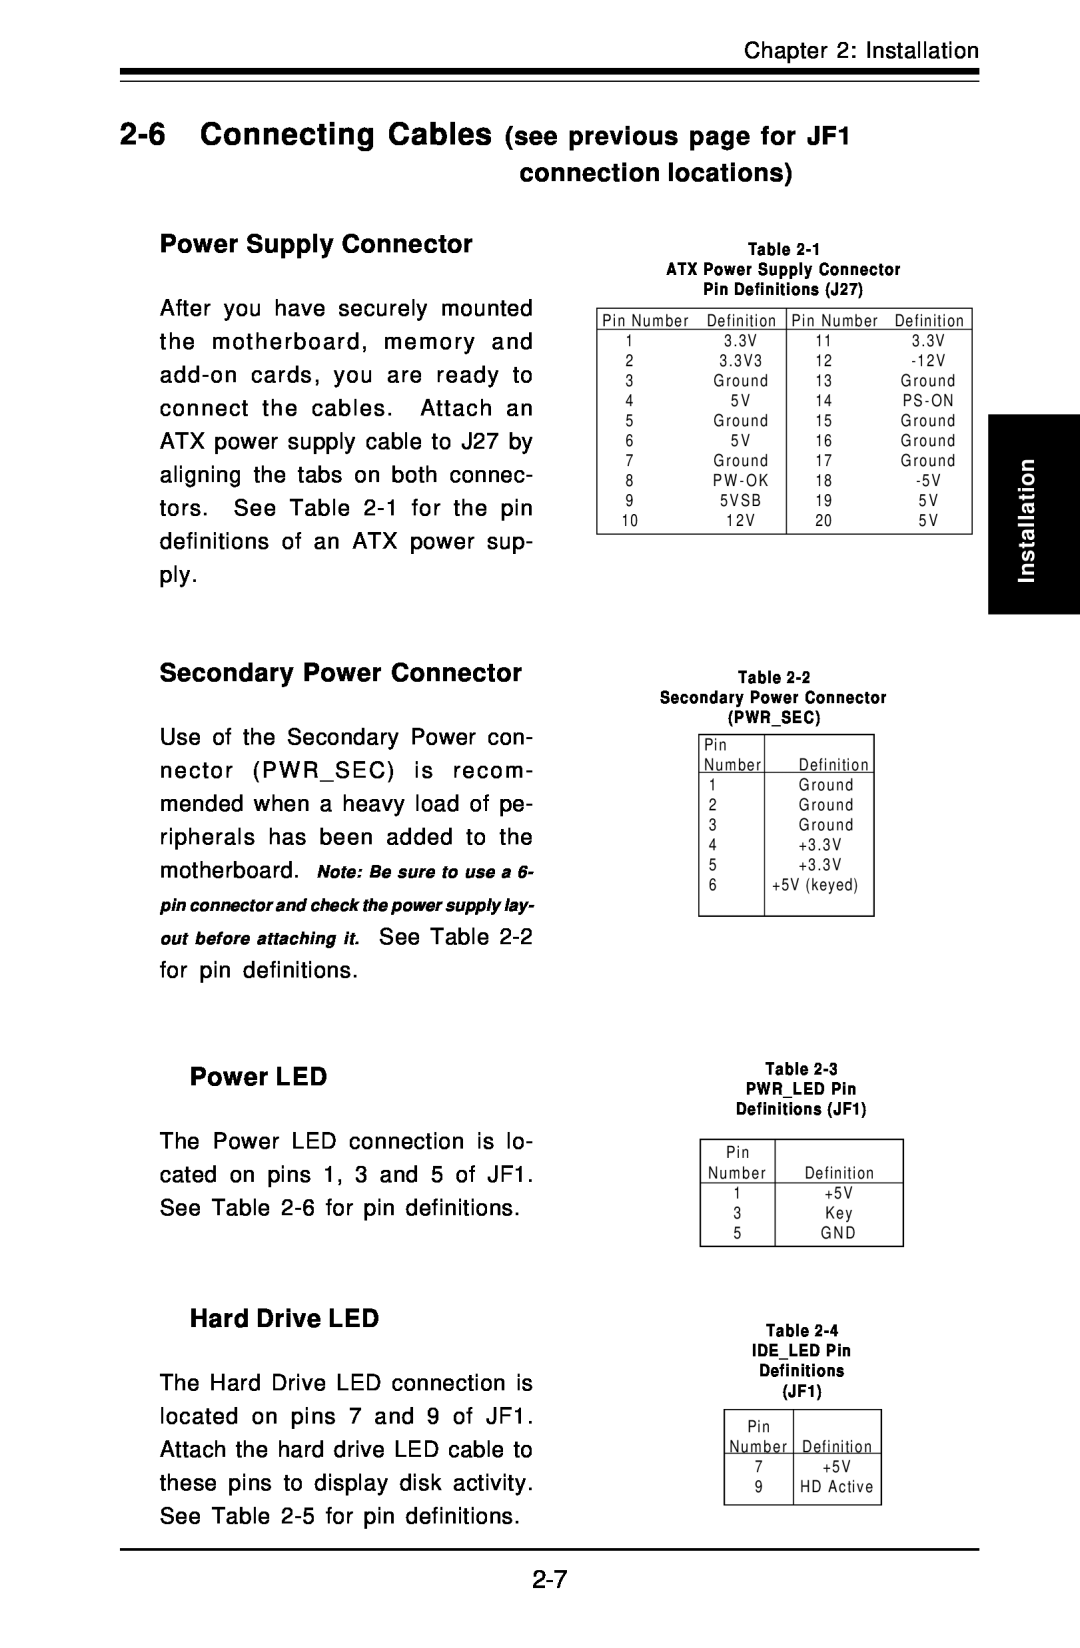 SUPER MICRO Computer Super PIIIDME user manual Connecting Cables see previous page for JF1, connection locations, Power LED 